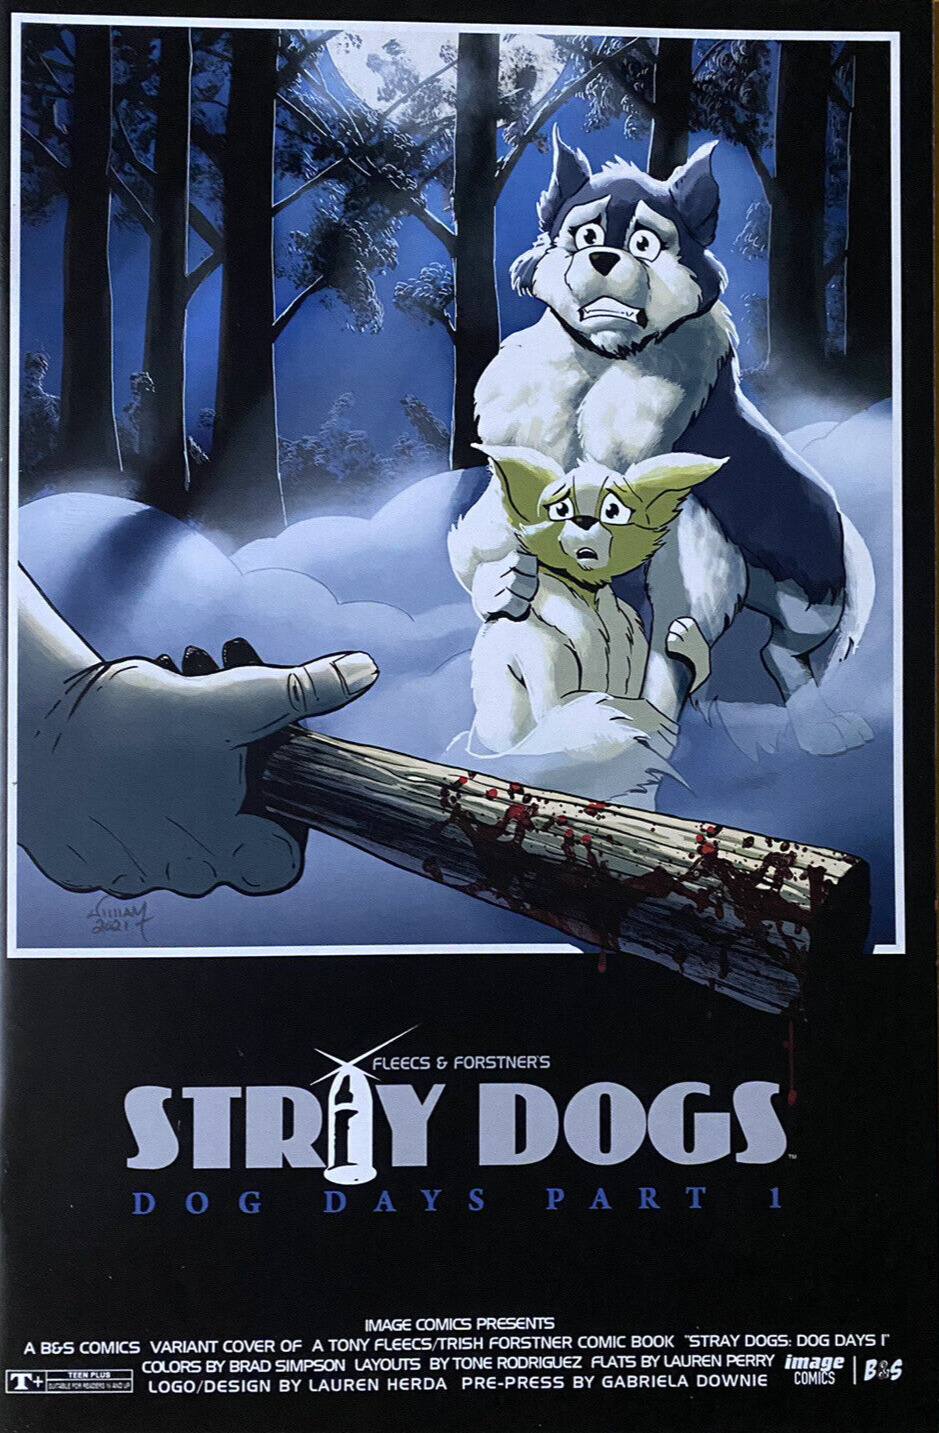 Stray Dogs: Dog Days #1 Variant By William Russell VHTF Limited to 500 copies